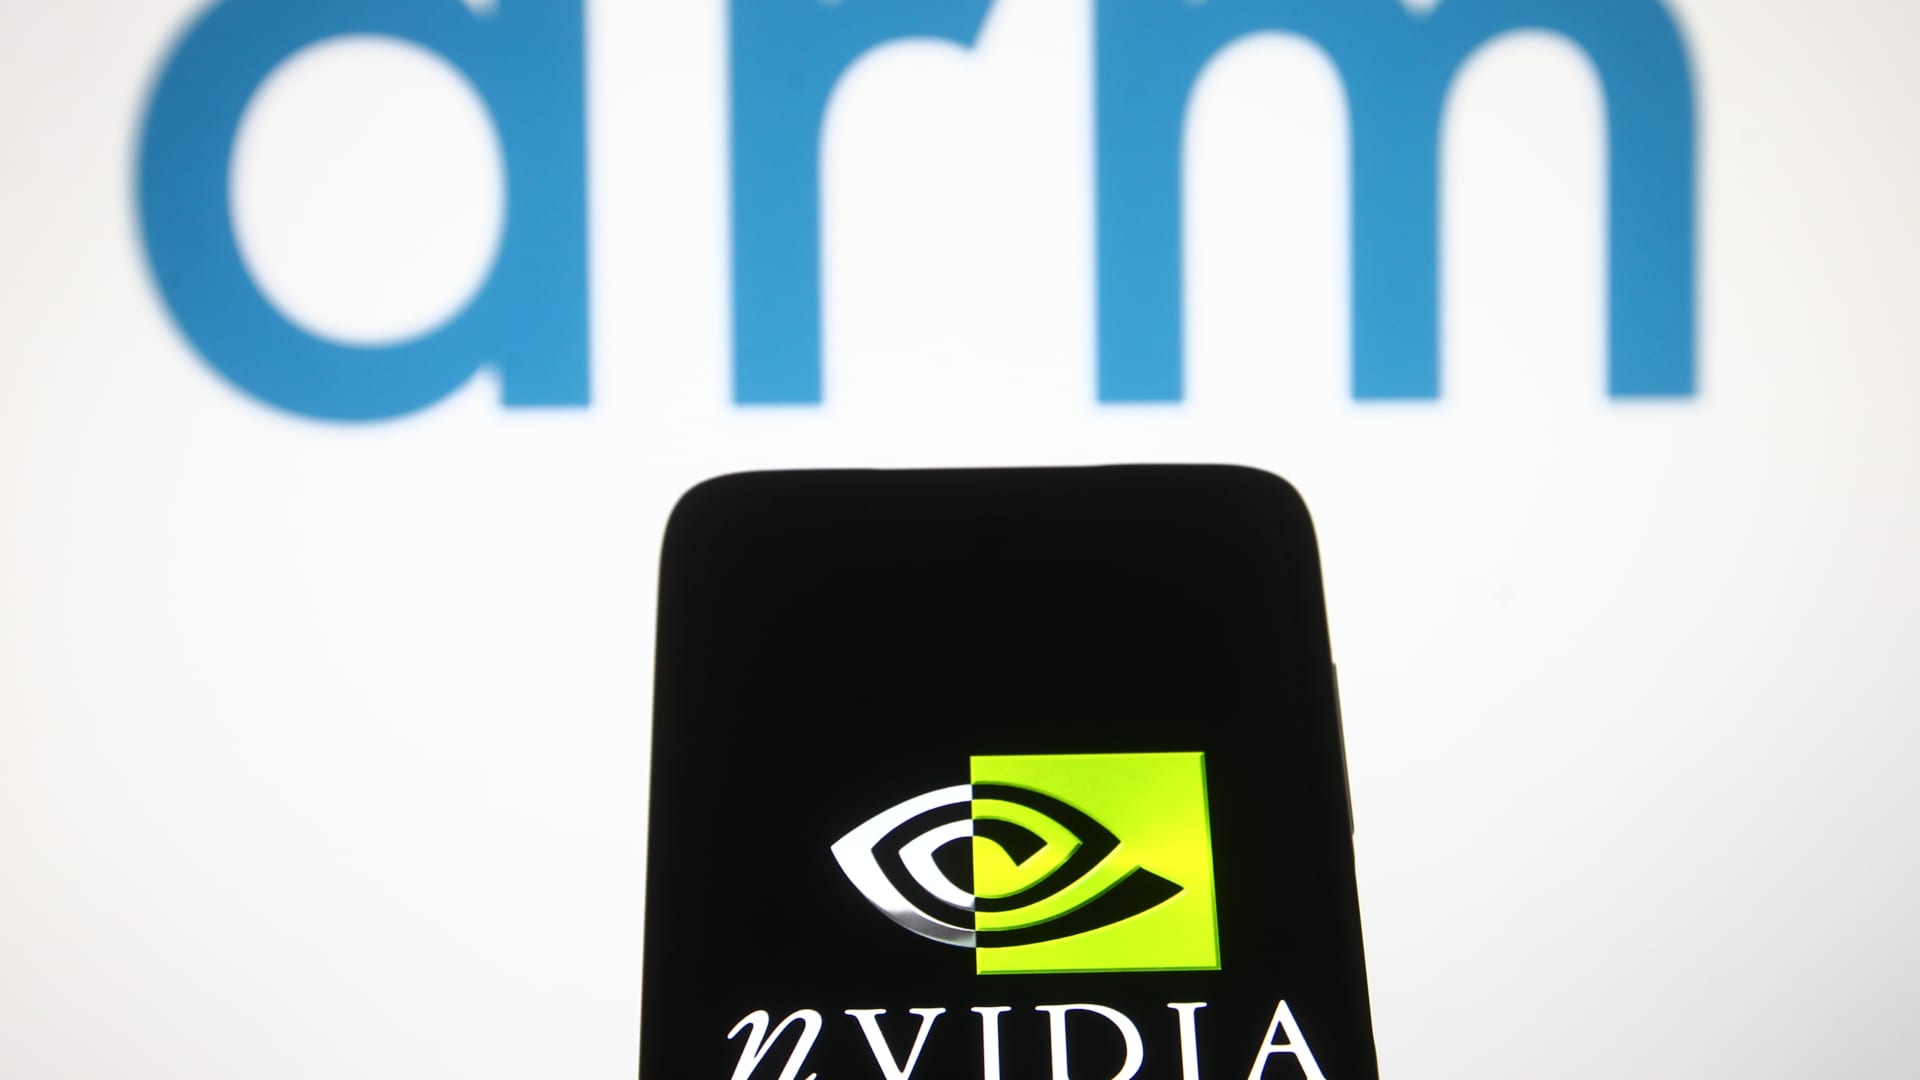 After Nvidia’s 200% rally this yr, investors look to the Arm IPO — but the two are very different